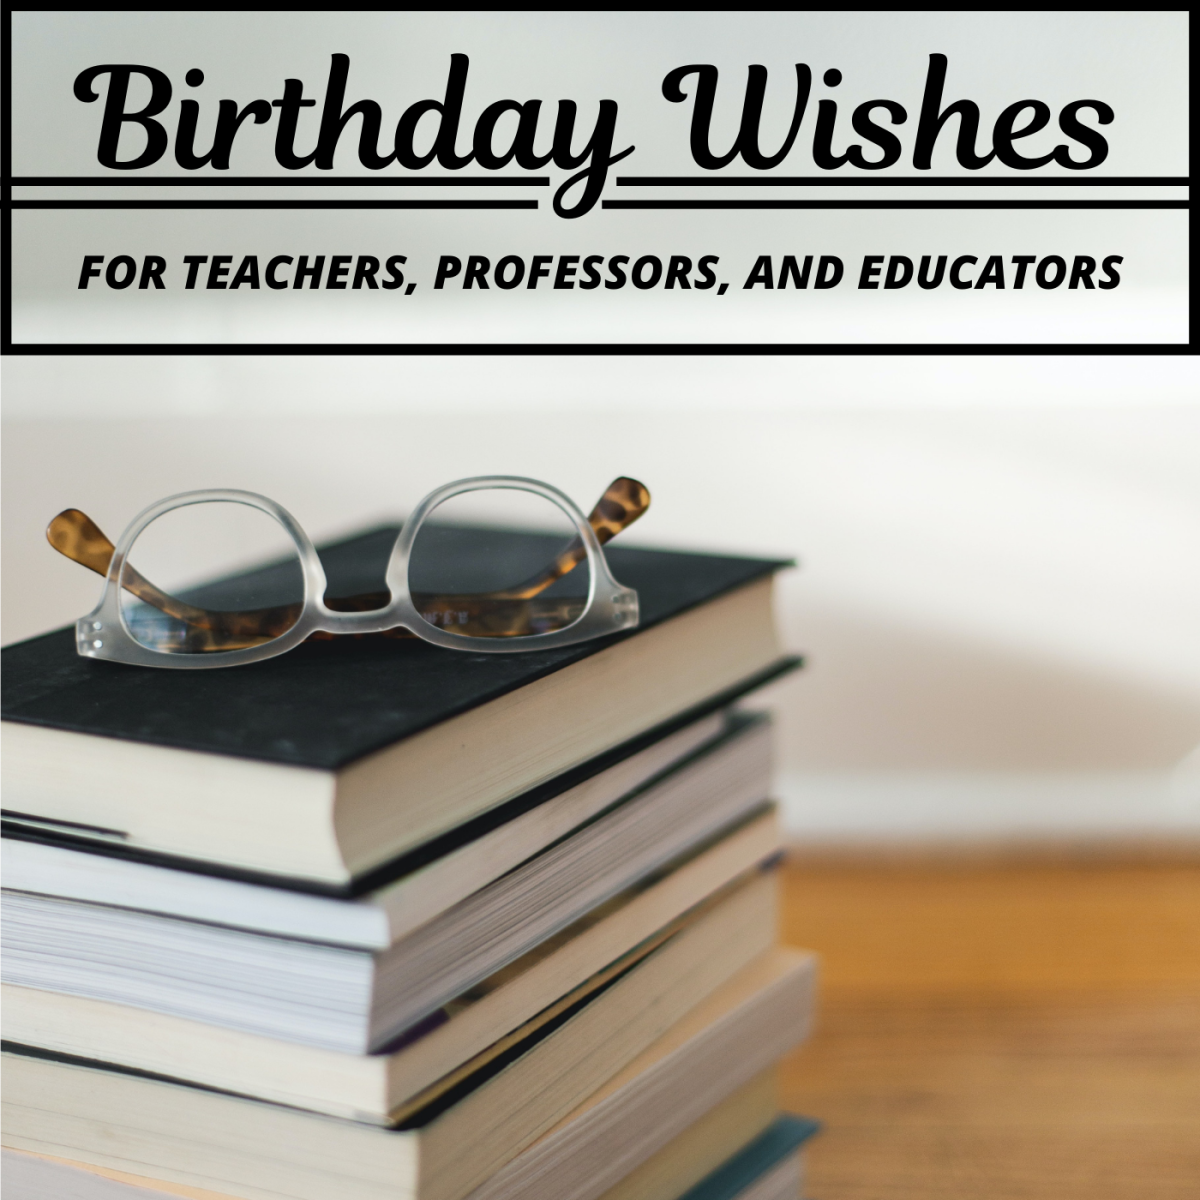 Example Birthday Wishes and Messages for Teachers and Educators